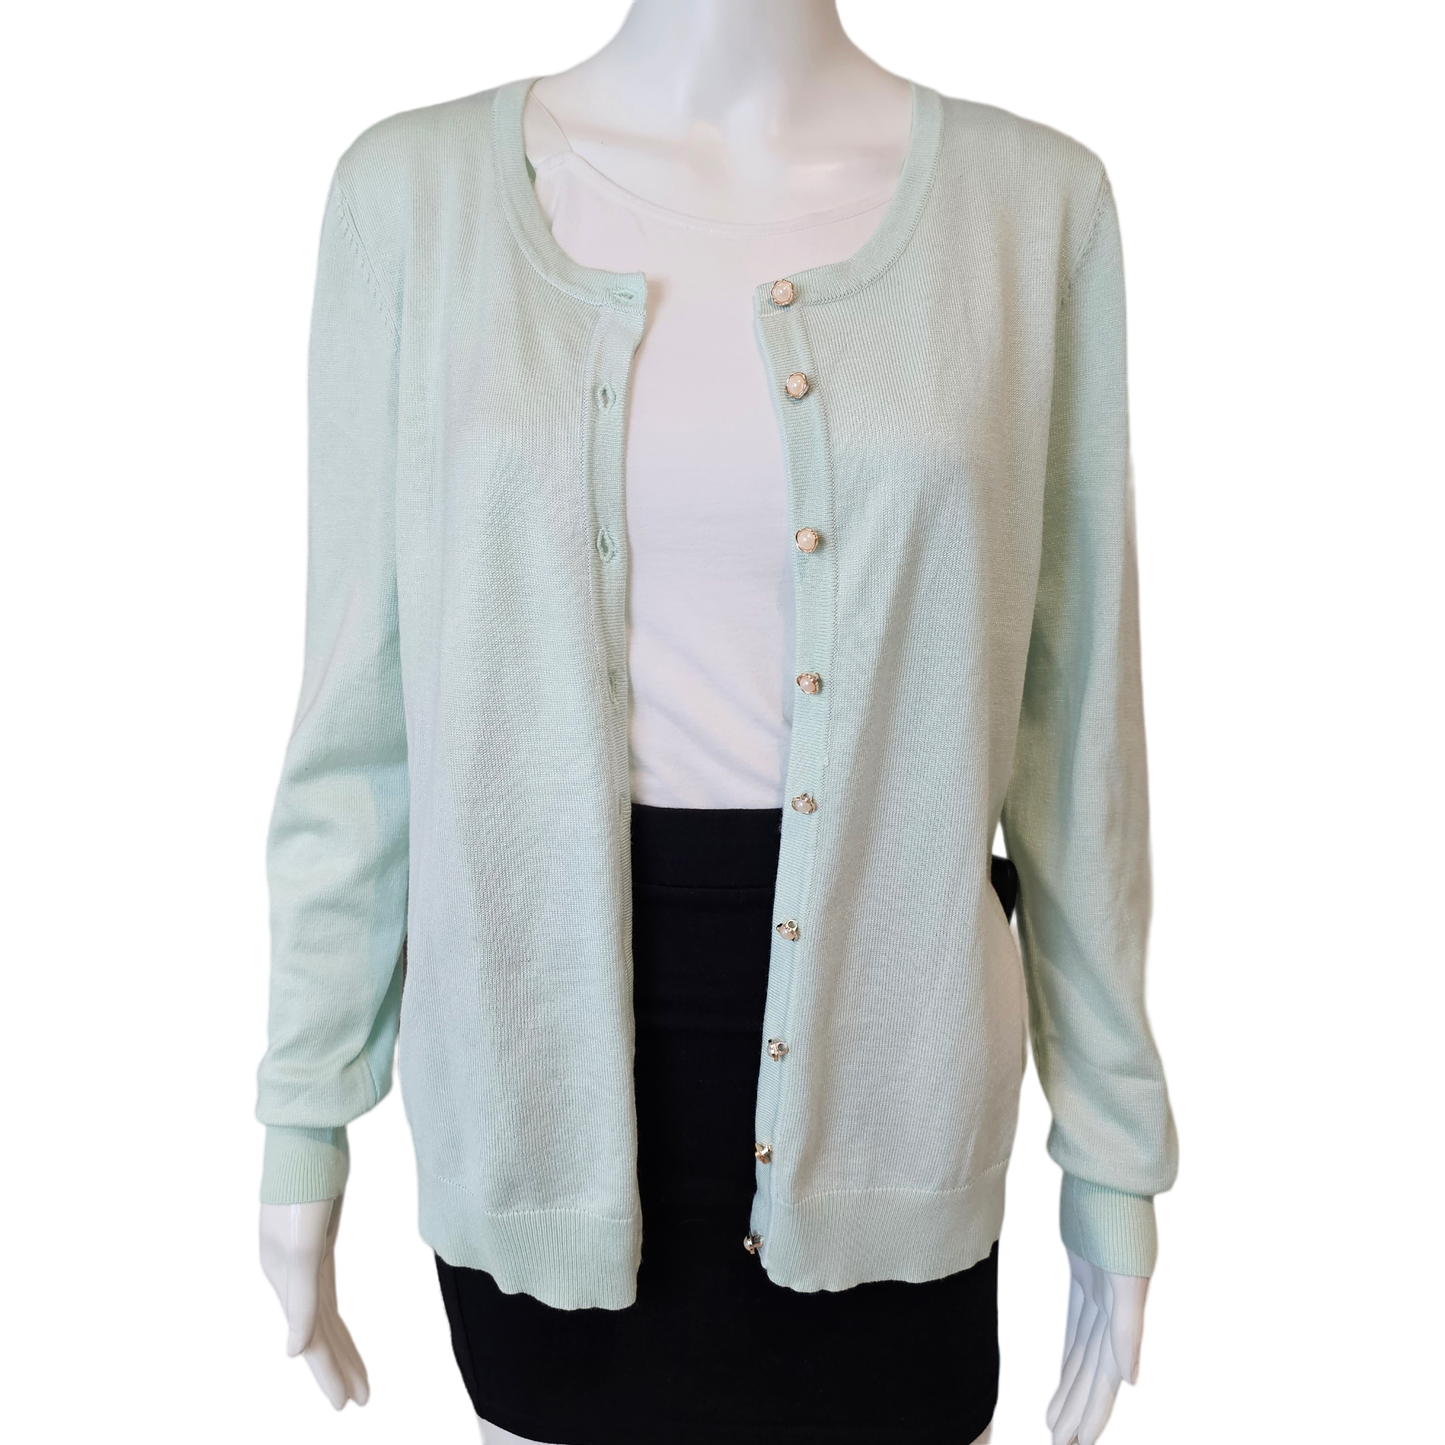 Cardigan By select + trend Size: L